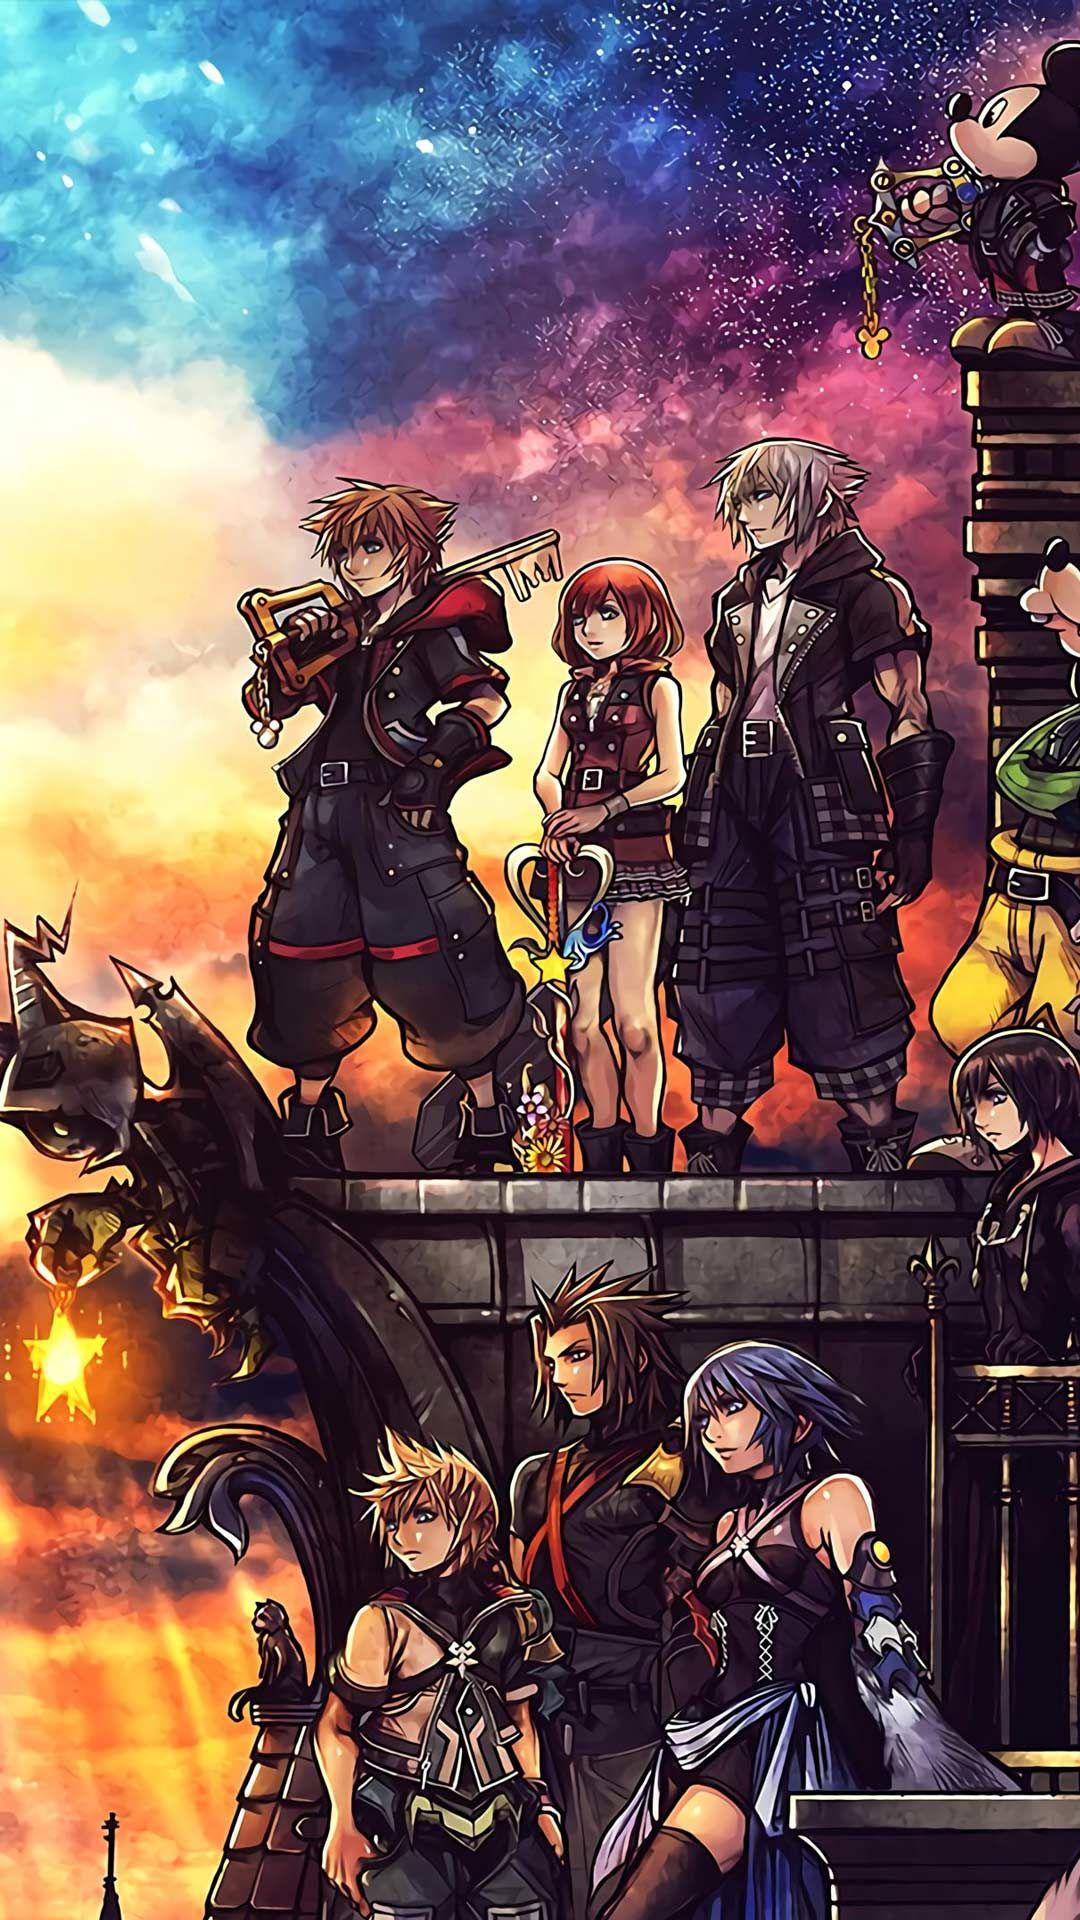 1080 x 1920 · jpeg - Get some Kingdom hearts 3 game HD images as iPhone android wallpaper ...